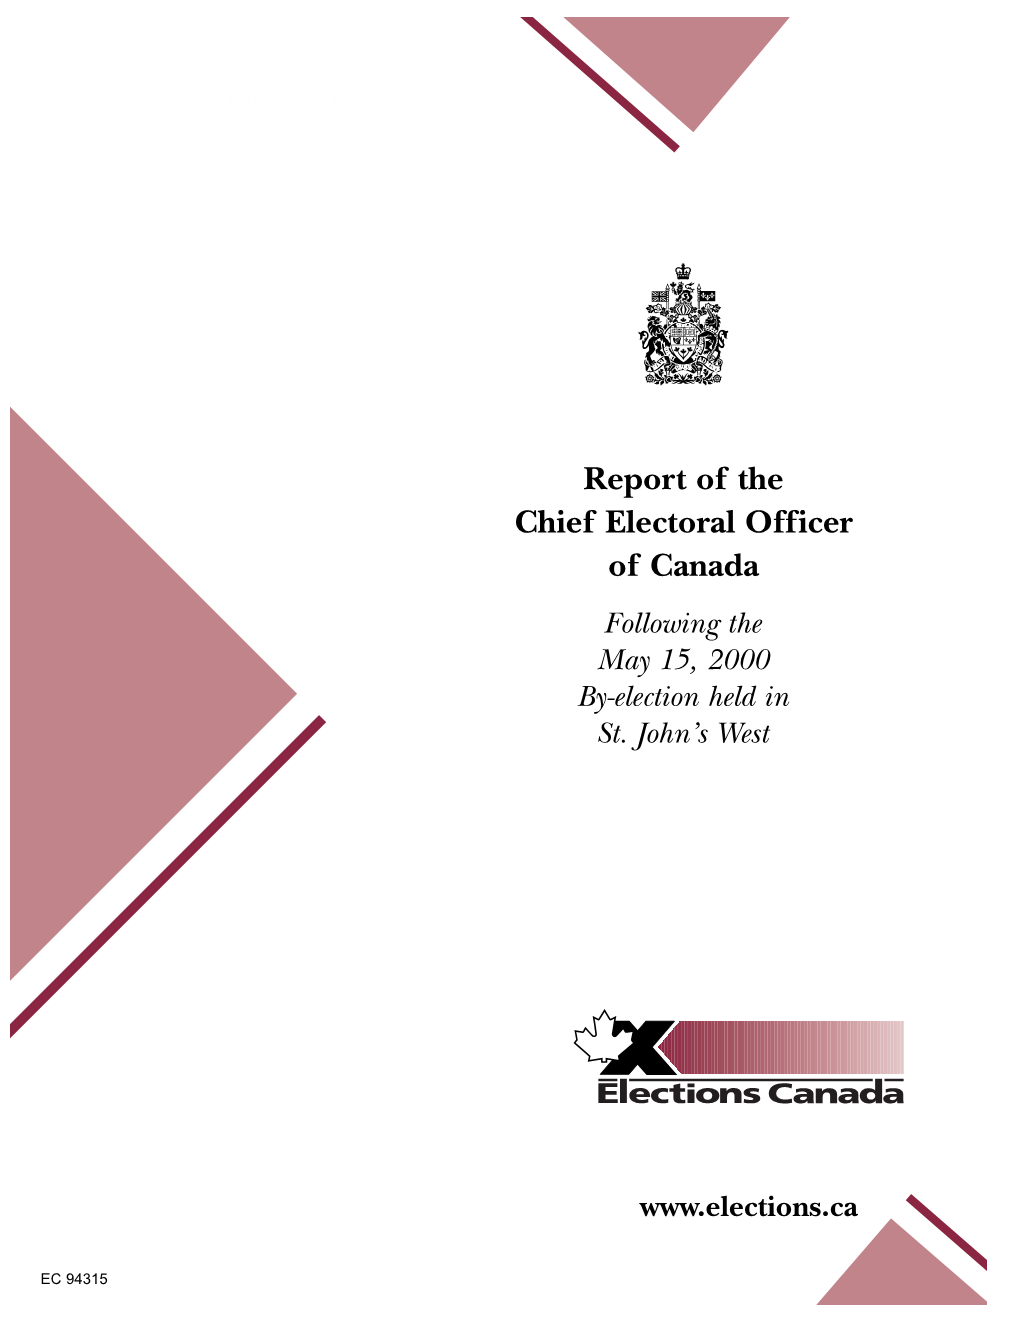 Report of the Chief Electoral Officer of Canada Following the May 15, 2000 By-Election Held in St